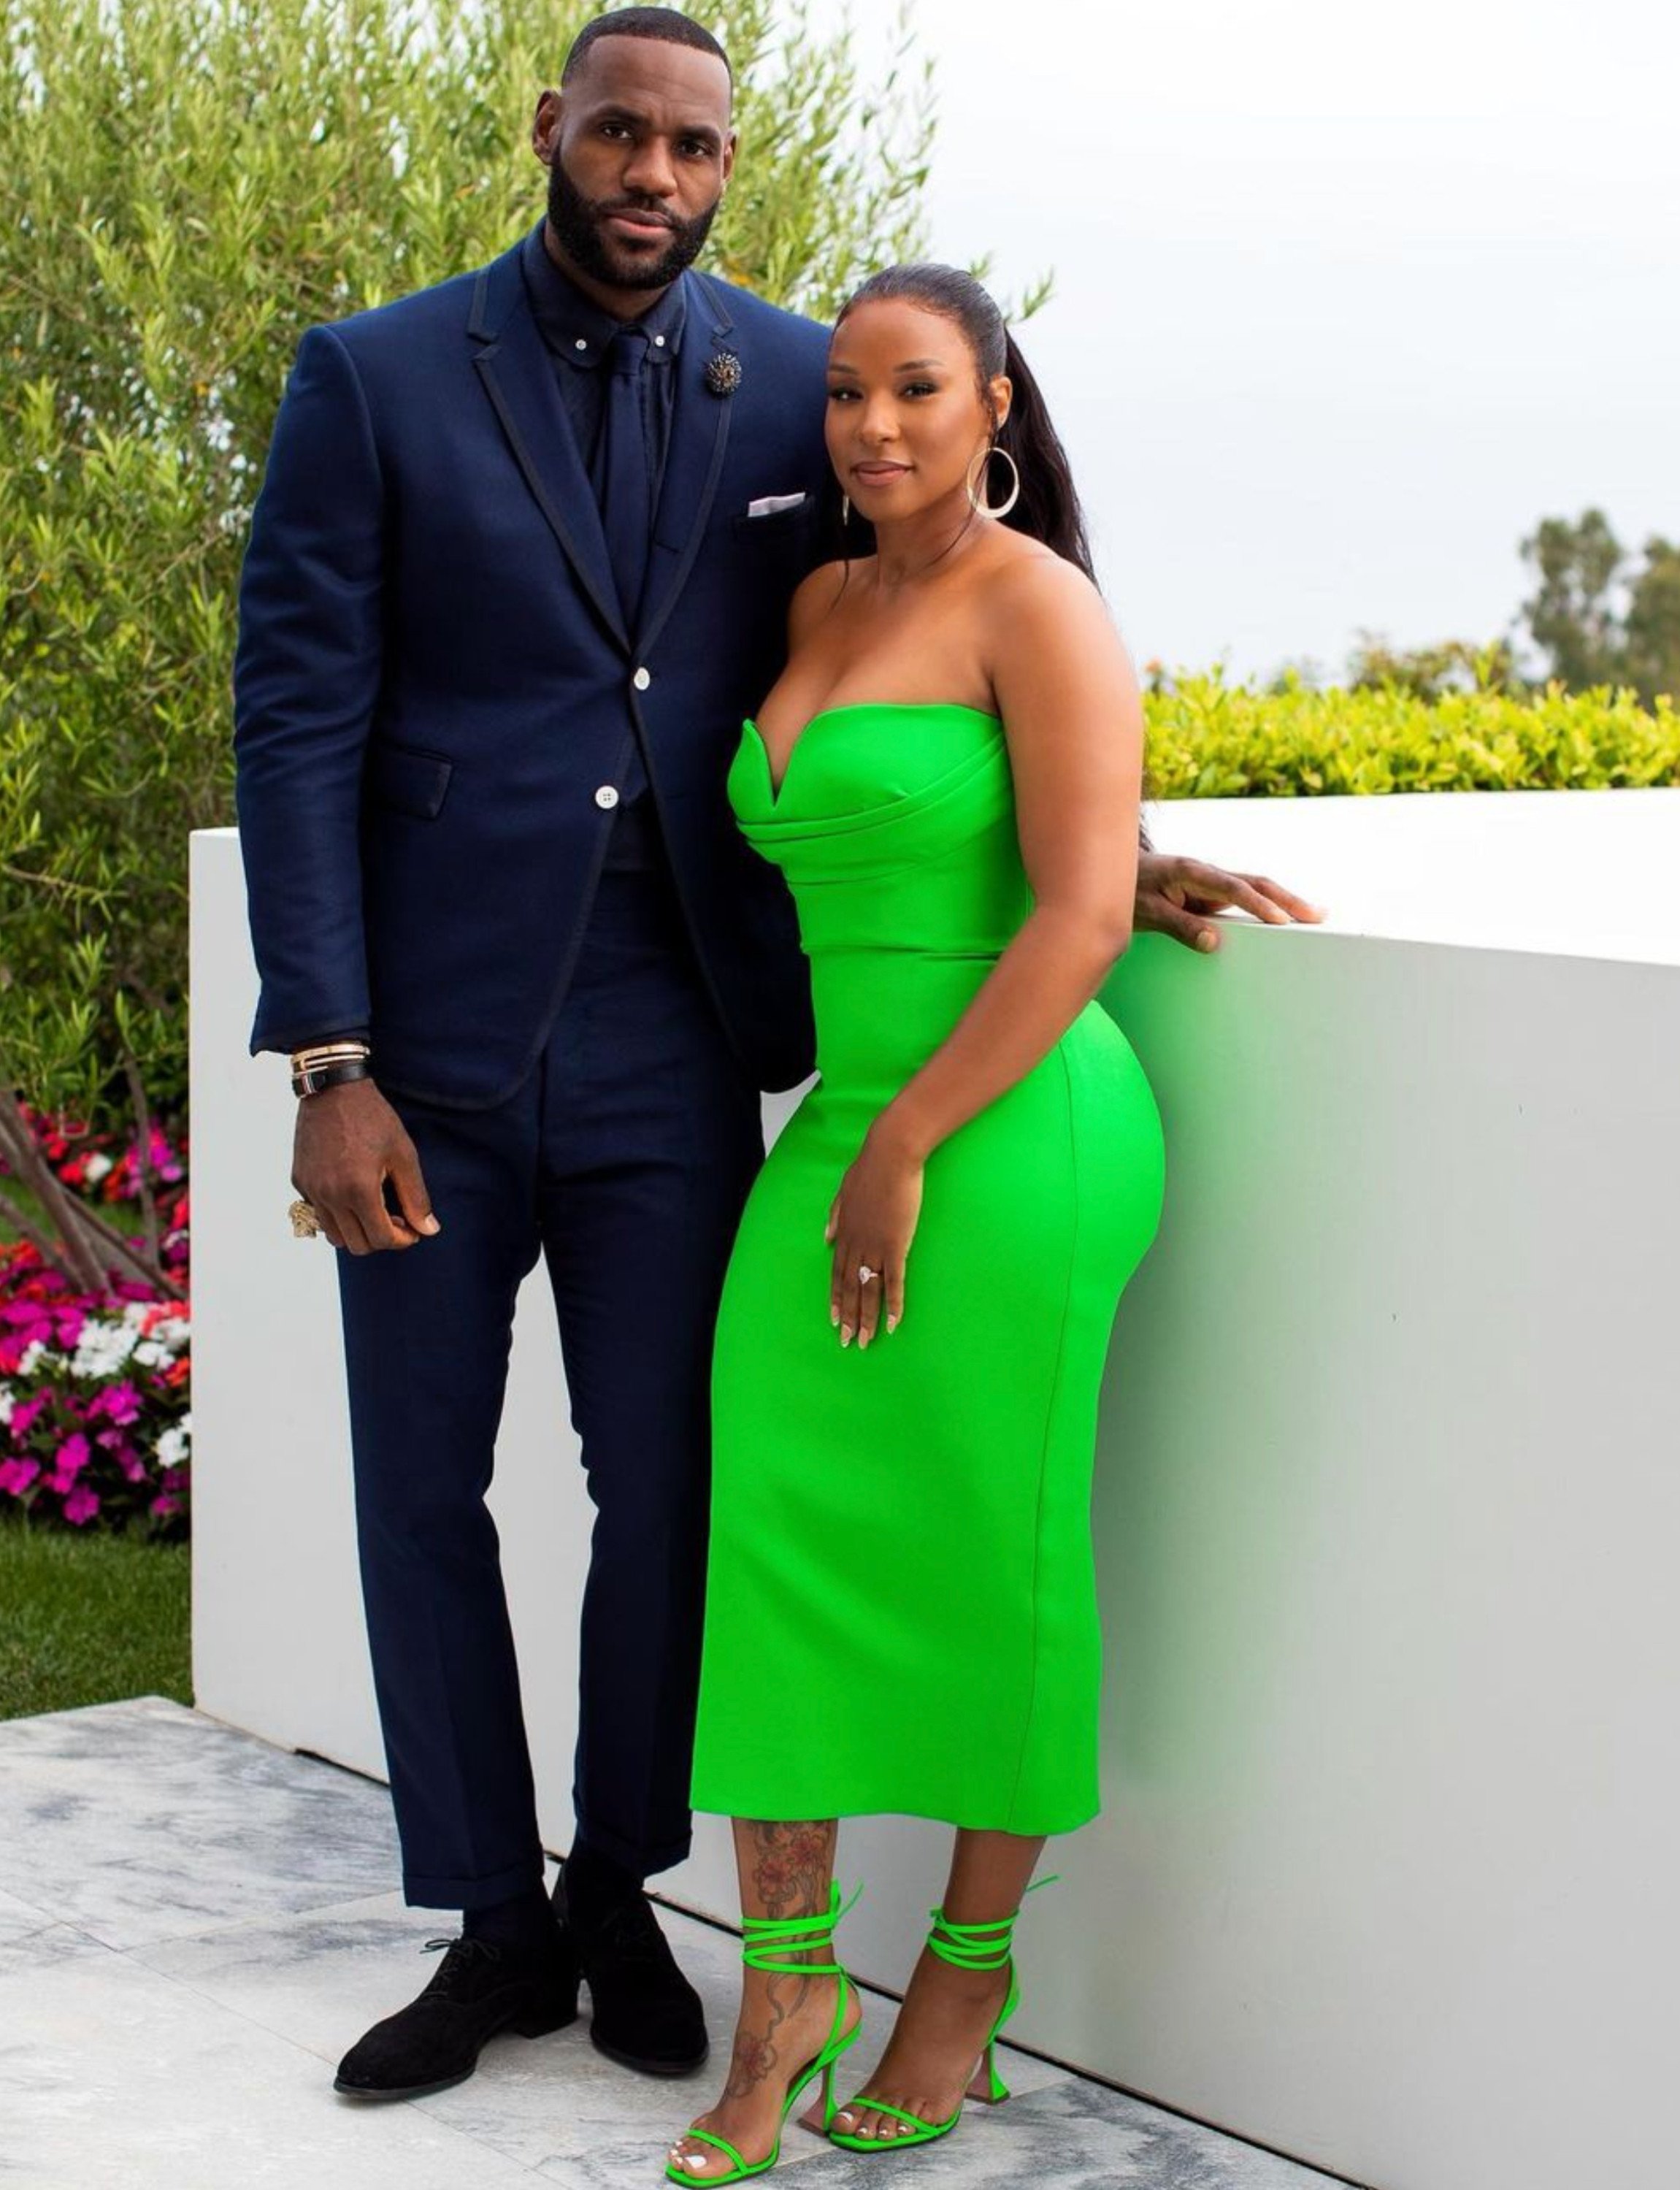 Inside LeBron and Savannah James' luxury billionaire lifestyle: the NBA star and his childhood sweetheart enjoy tropical holidays, wearing Gucci, Dolce & Gabbana and Rolex, and own several mansions | South China